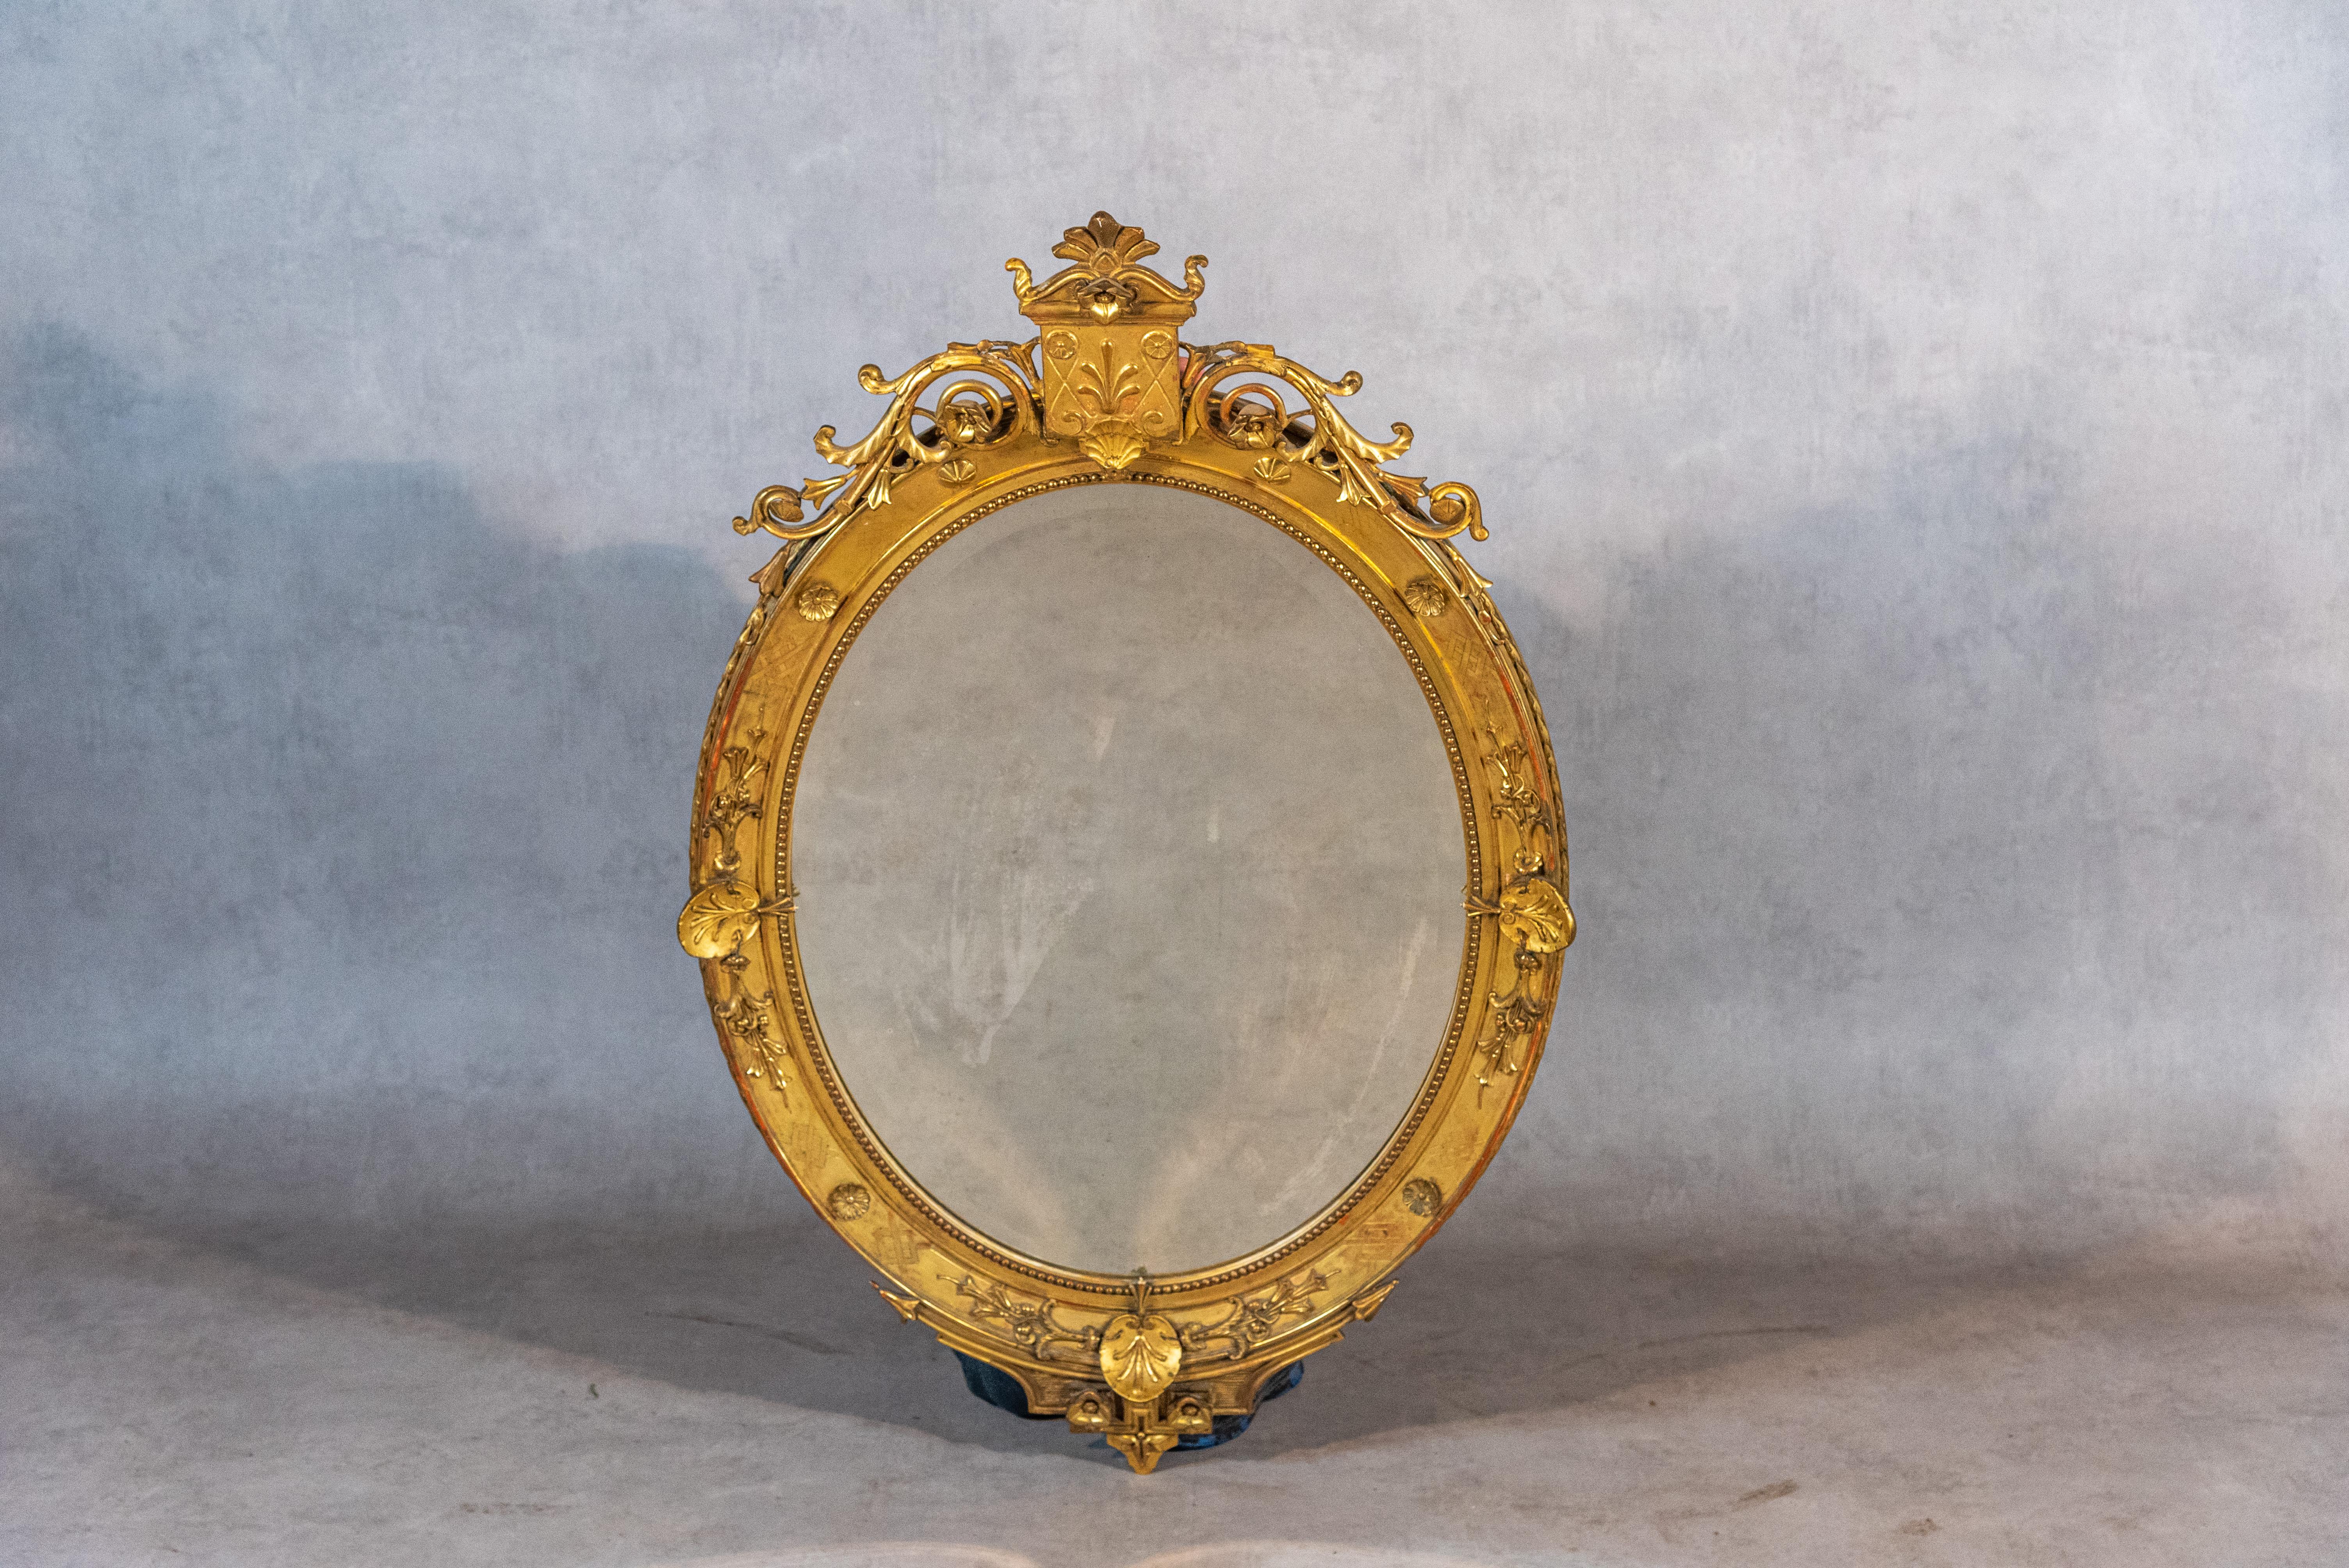 This 18th century French Gilded Gold Oval Mirror of the Louis XV period is a stunning piece that is sure to add a touch of elegance to any interior space. The mirror is a beautiful representation of the Louis XV style, featuring a gilded wood and